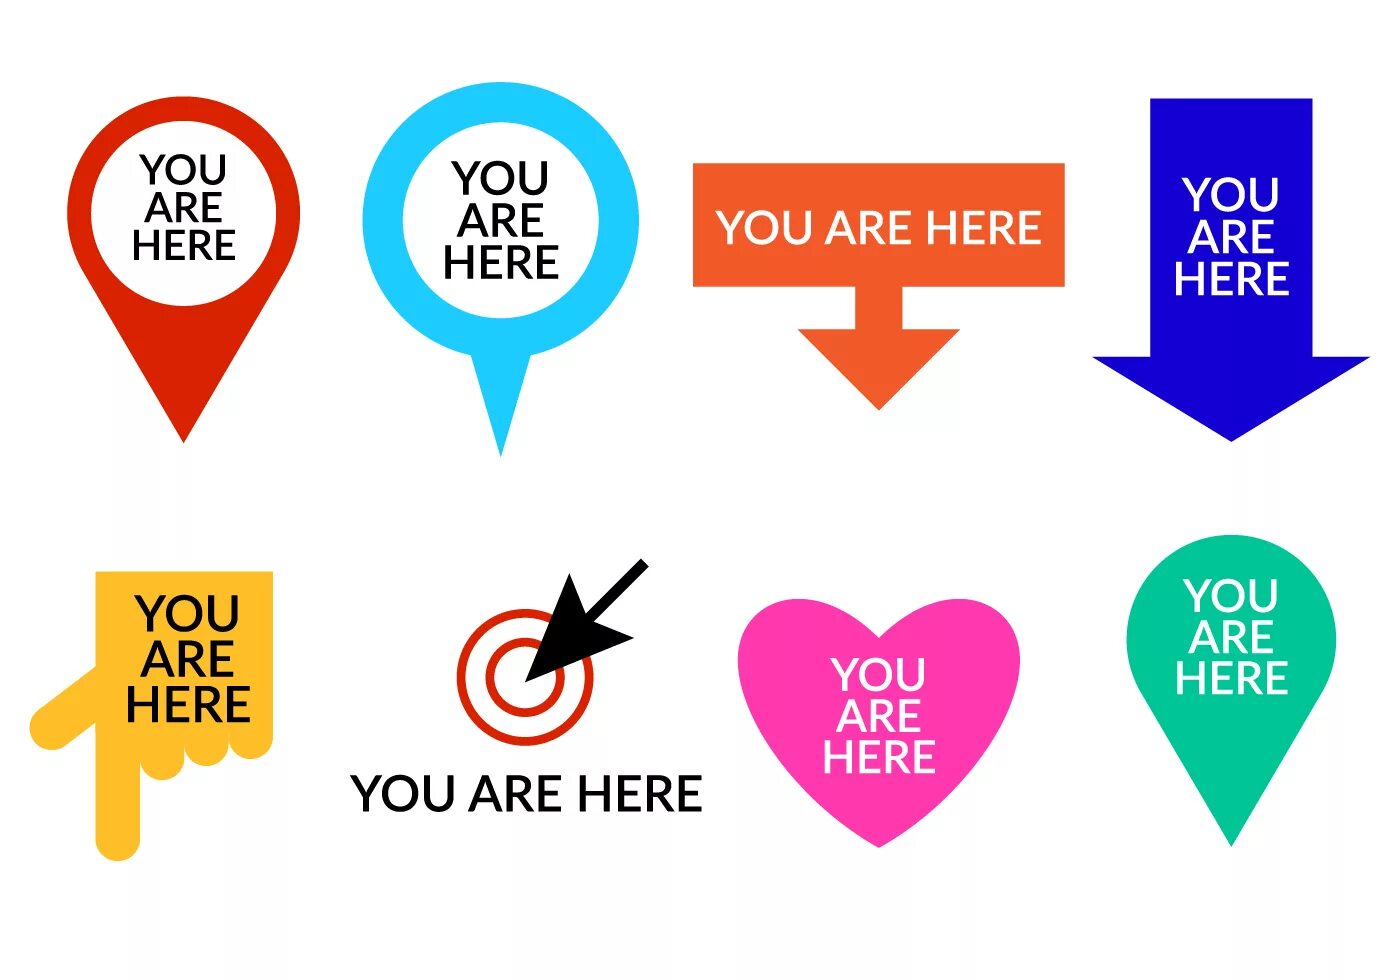 You are here world. You are here. You are here иконка. We are here значок. You are here sign.